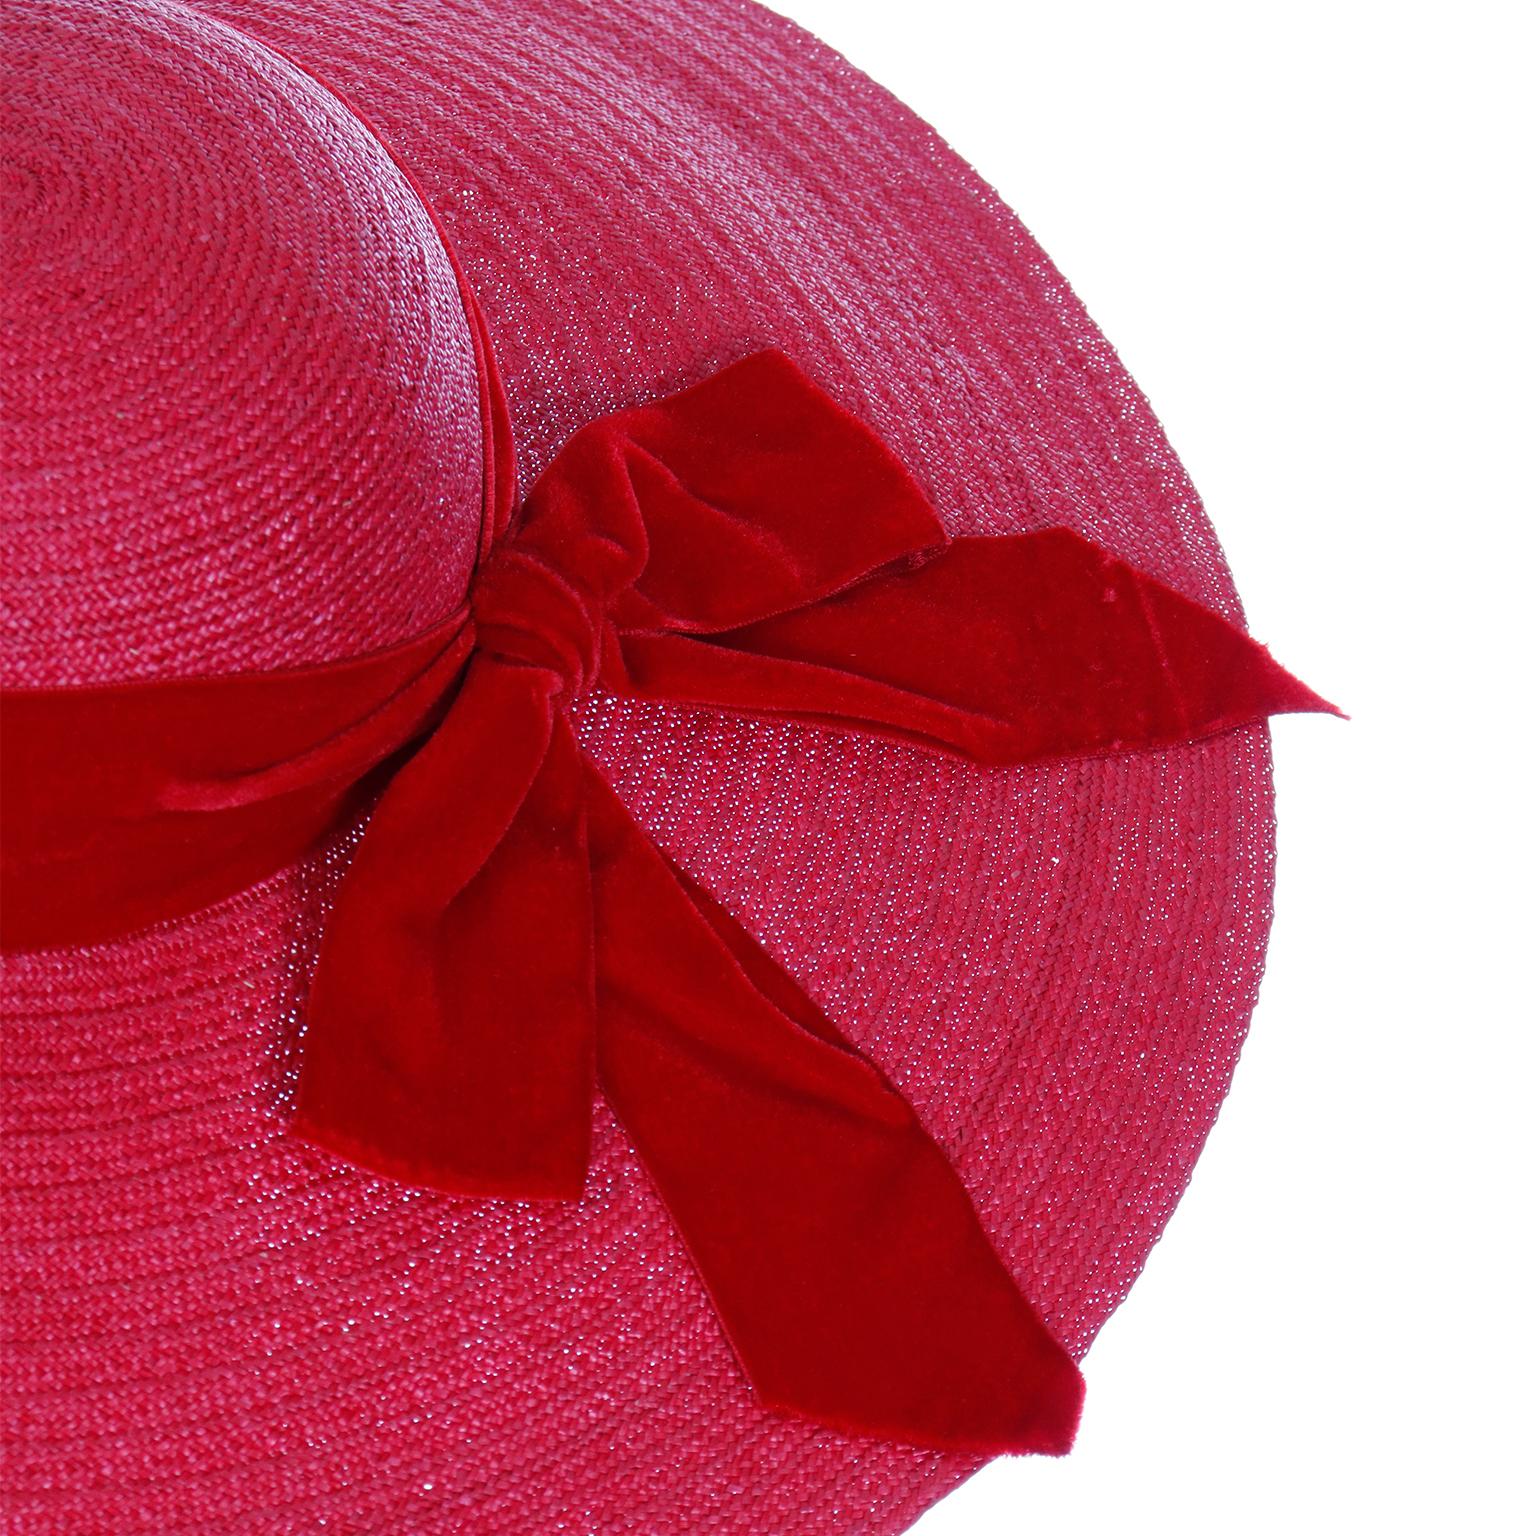 Vintage 1940s Wide Brim Red Straw Hat With Red Velvet Ribbon by Mr Leon For Sale 1